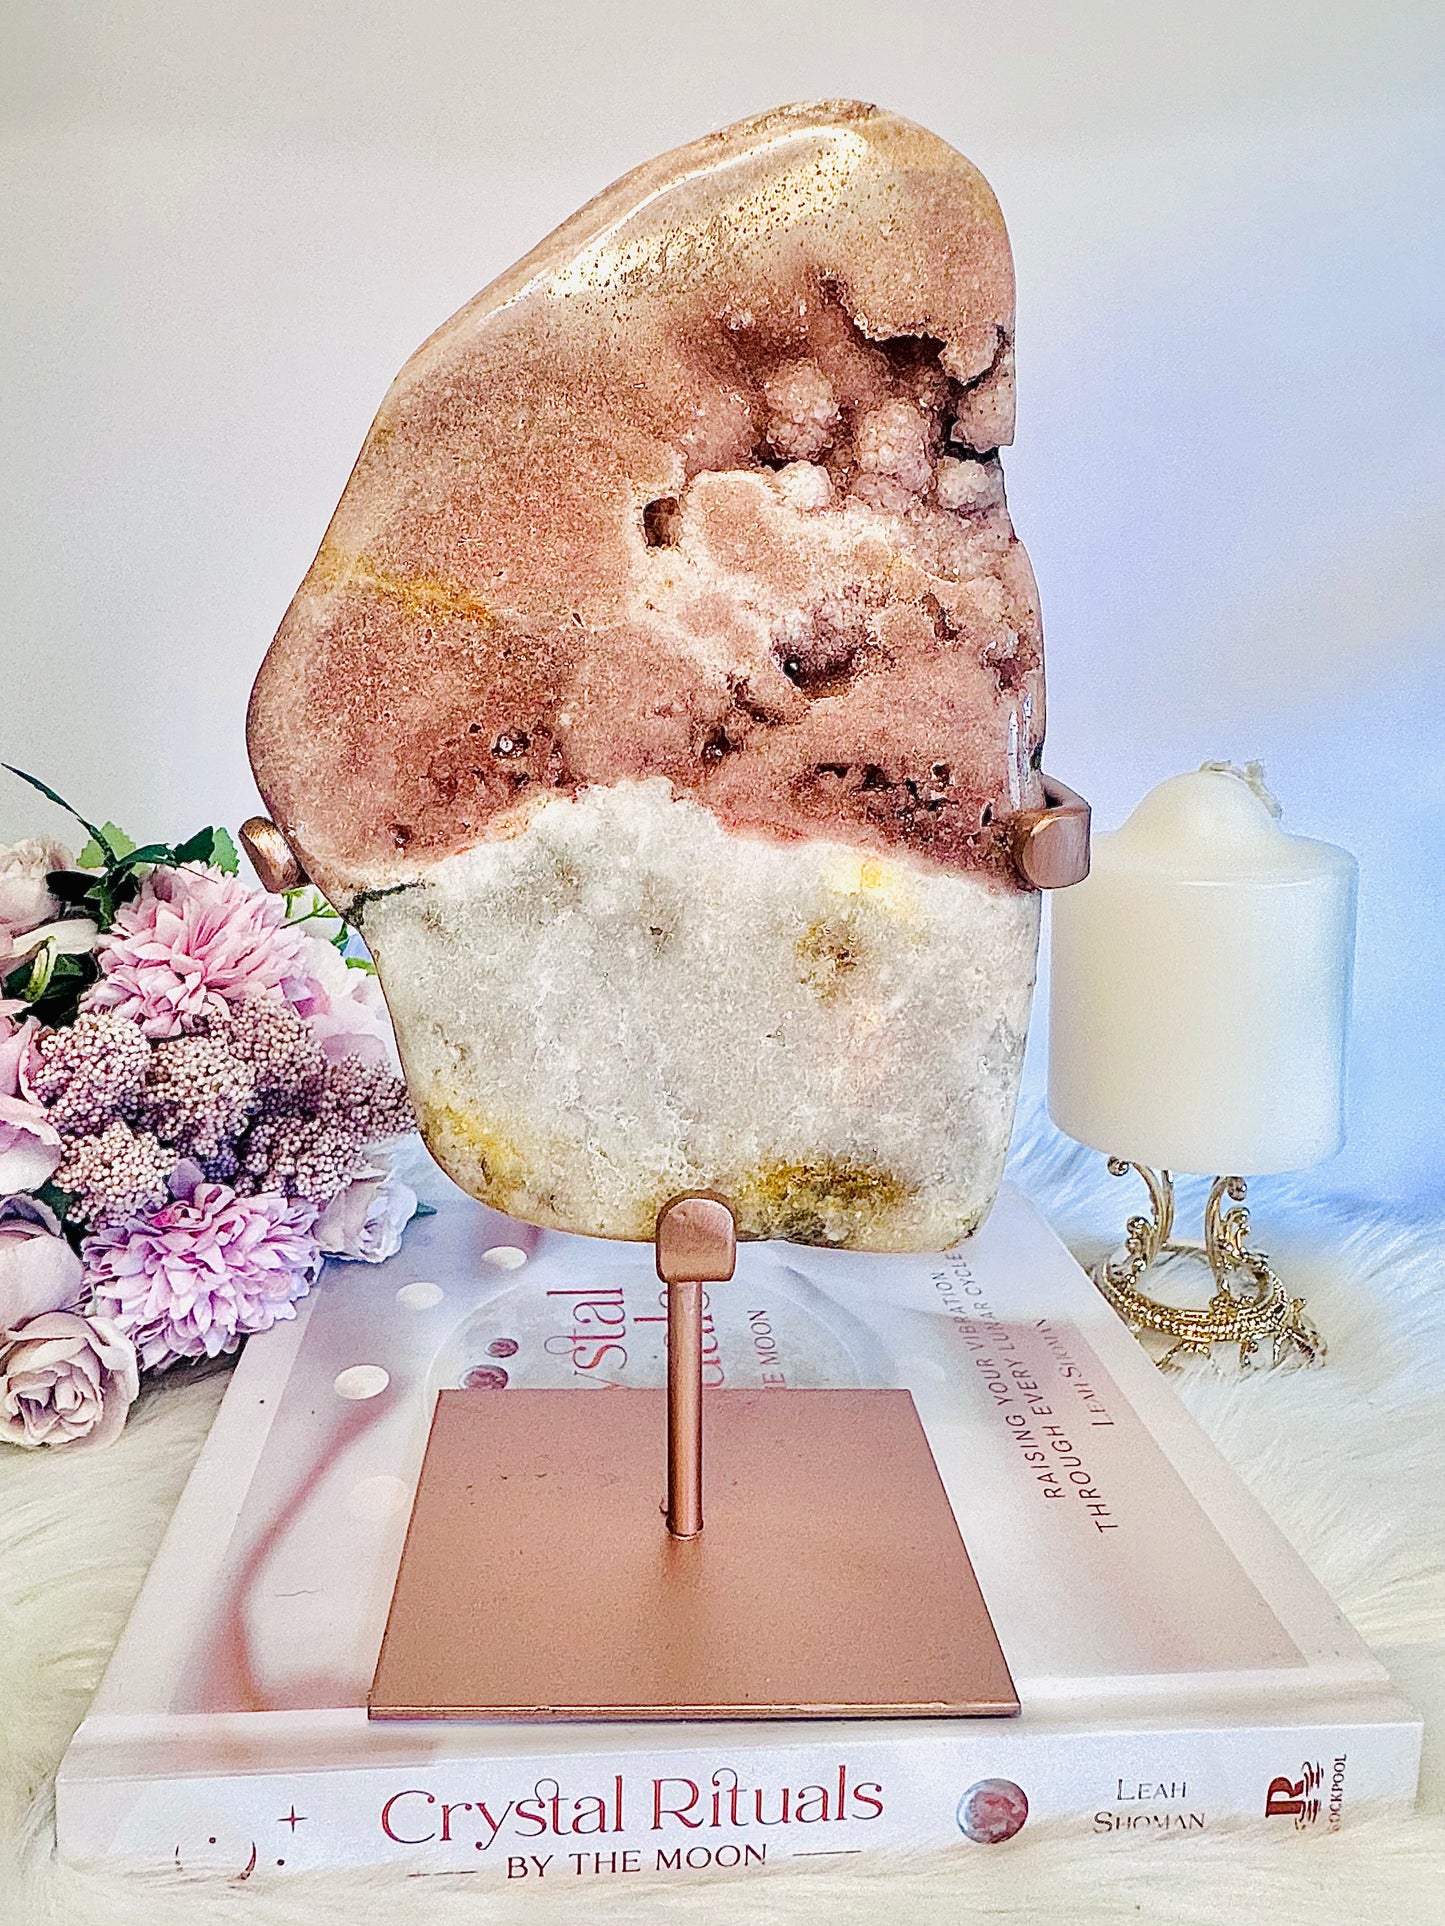 Classy & Absolutely Fabulous Large 1.34KG 27cm Pink Amethyst Natural Chunky Druzy Slab On Rose Gold Stand From Brazil ~ A True Stunner